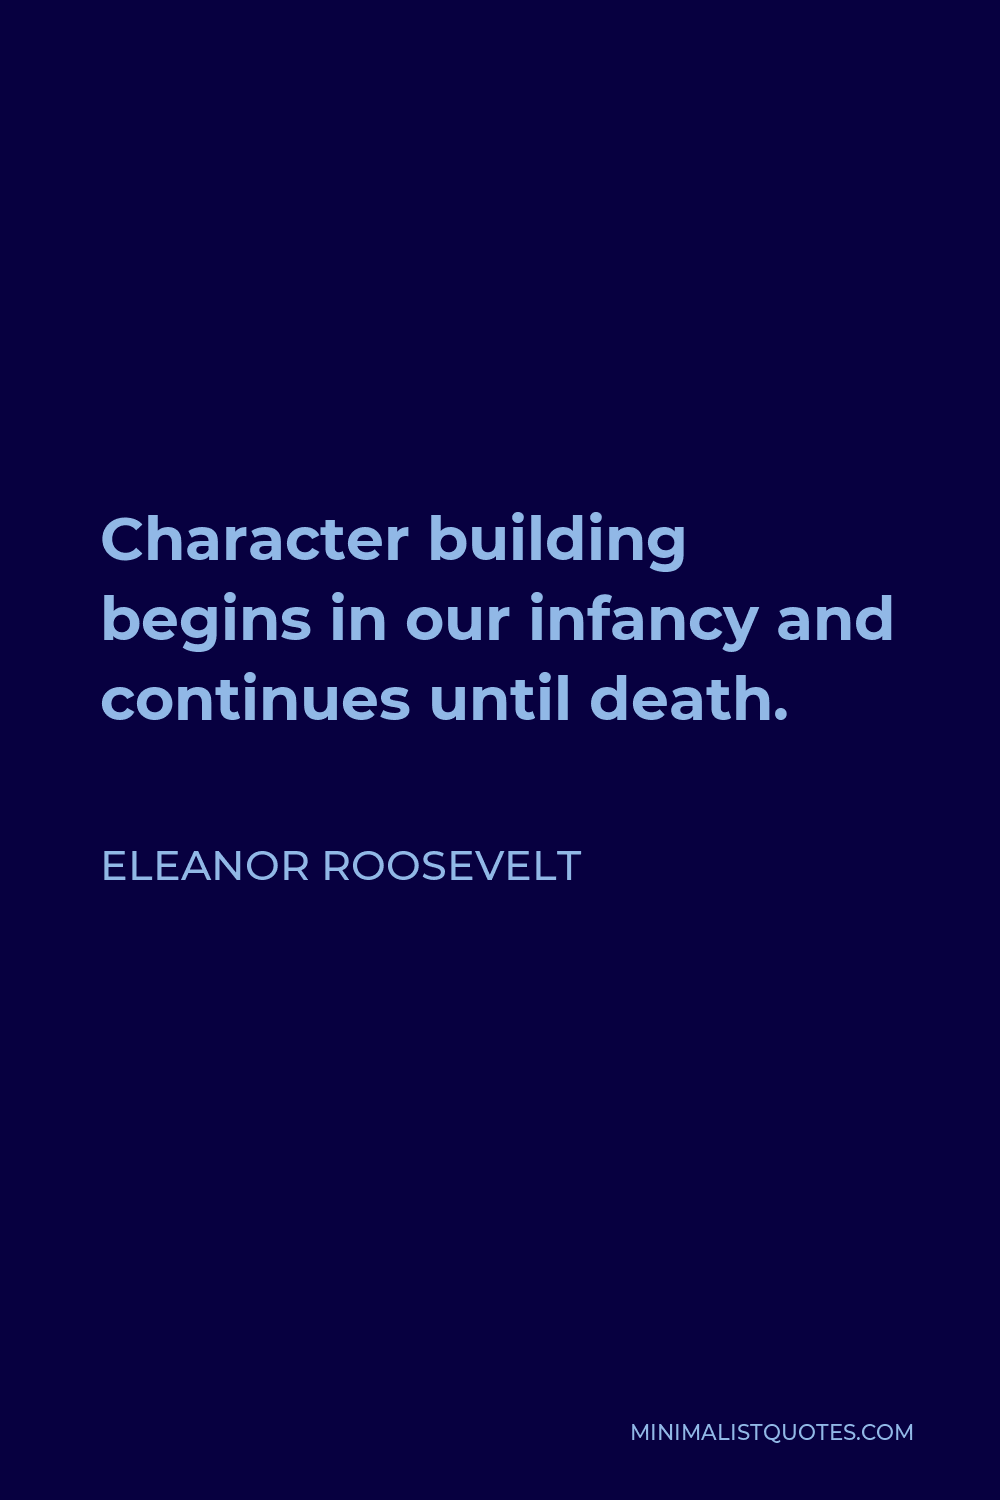 Eleanor Roosevelt Quote - Character building begins in our infancy and continues until death.